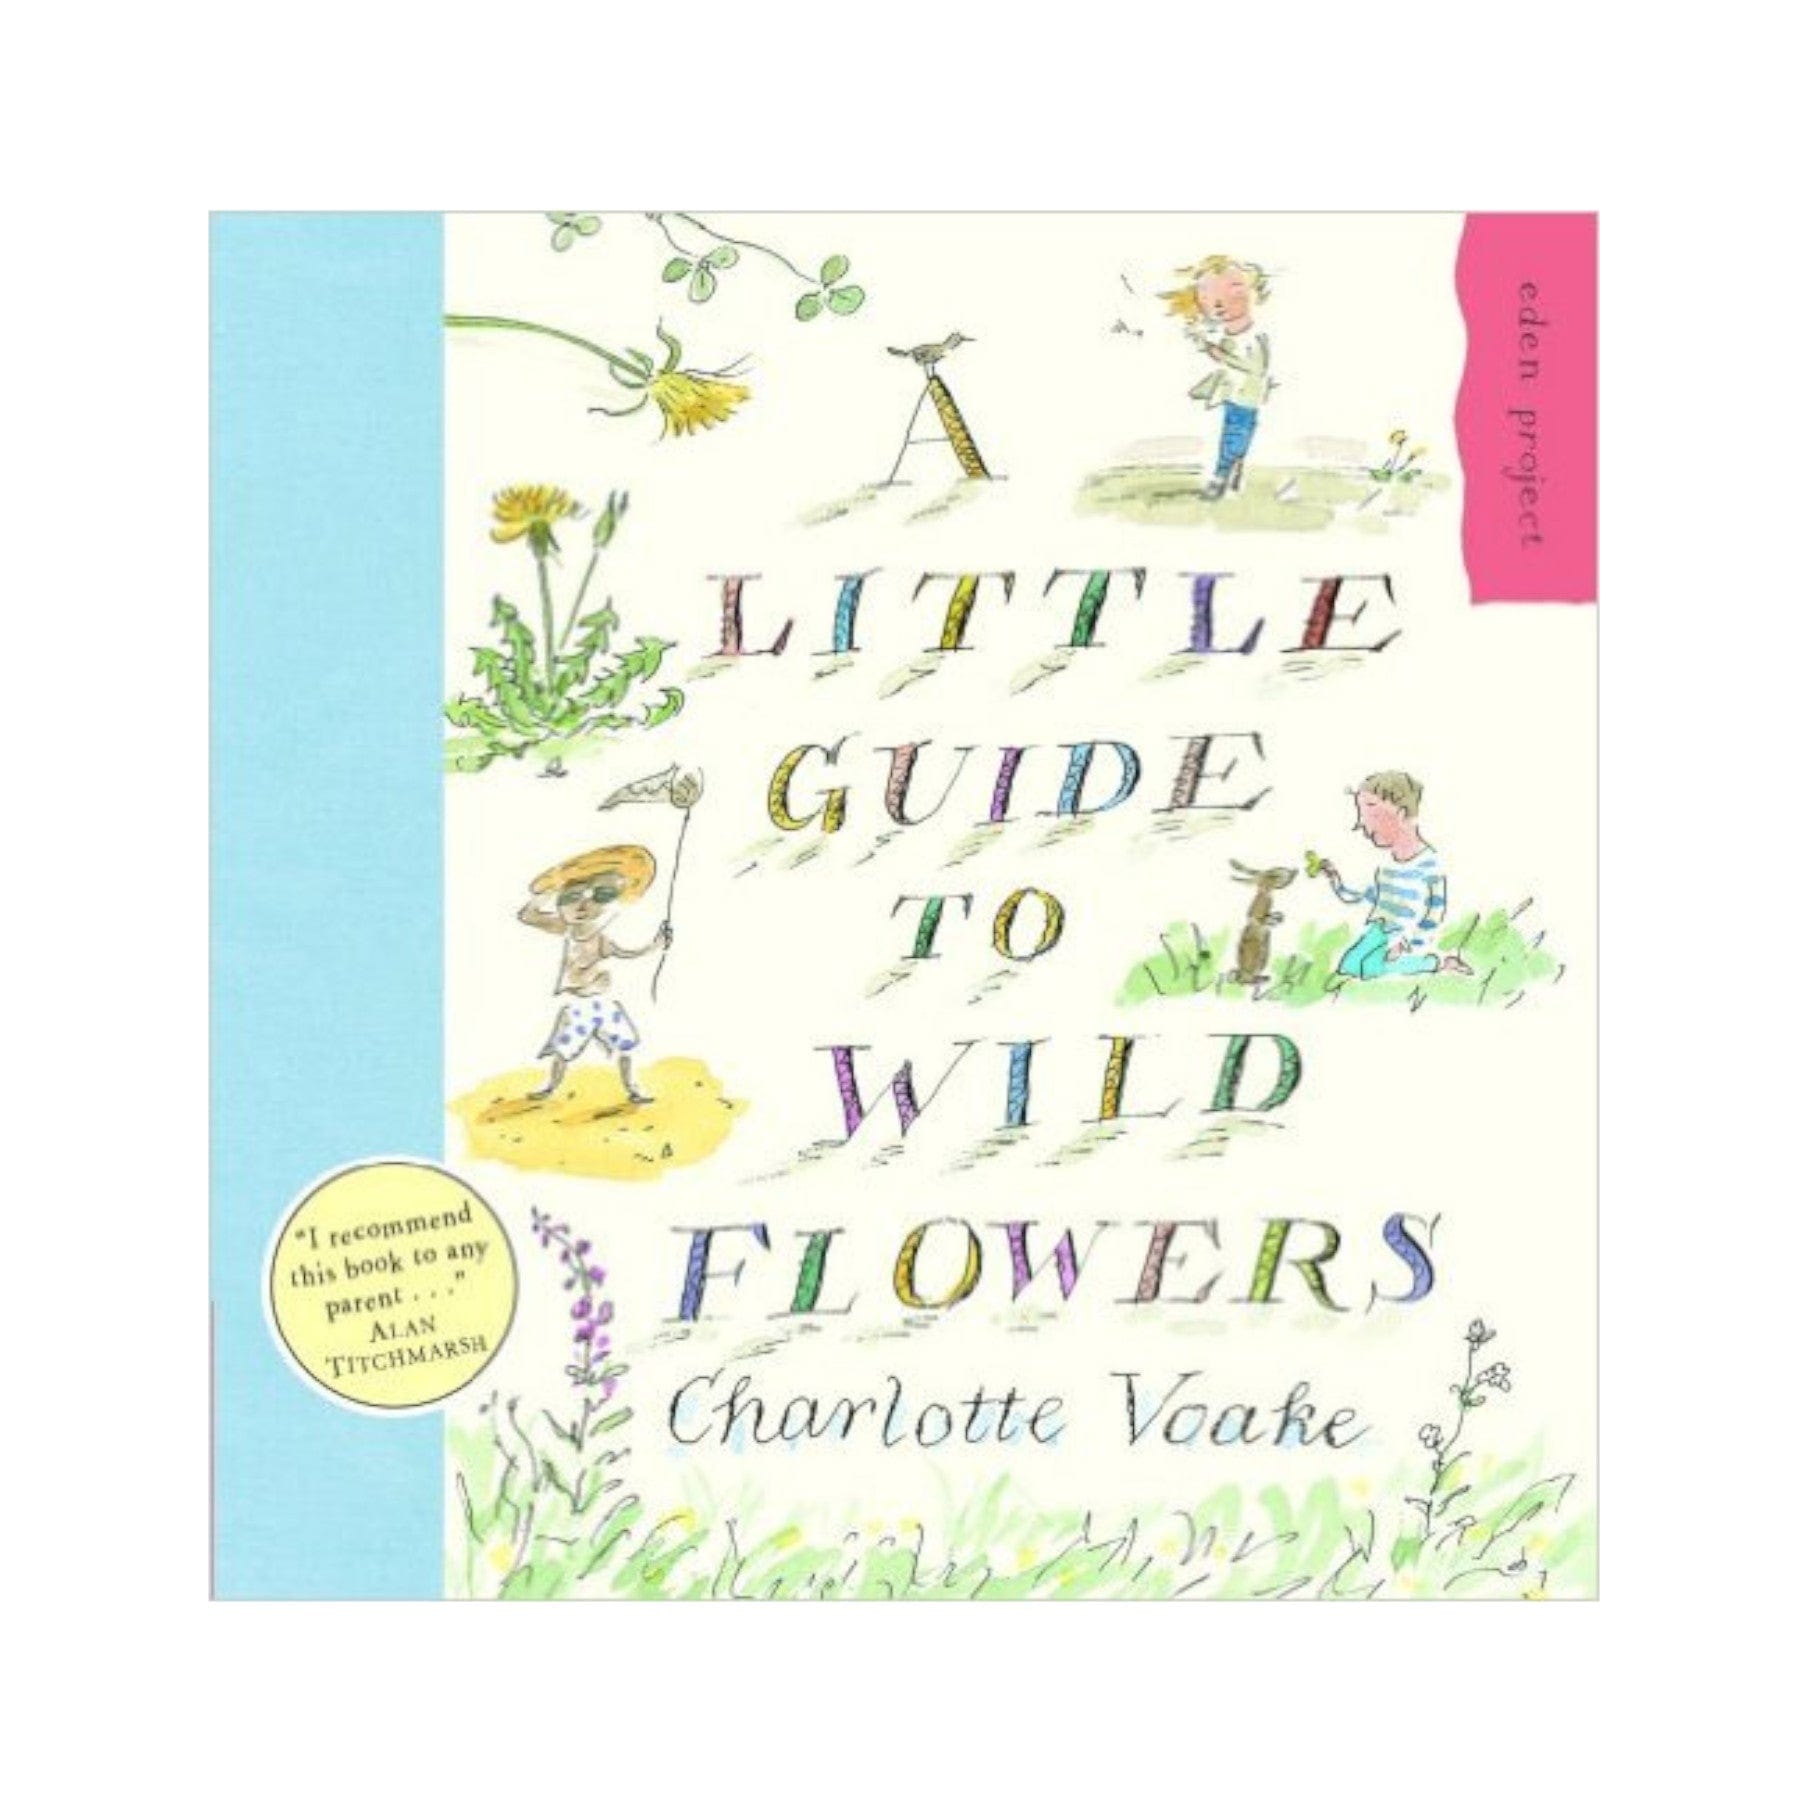 Illustrated book cover for "A Little Guide to Wild Flowers" by Charlotte Voake with drawings of children exploring nature, plants, and a recommendation by Alan Titchmarsh.